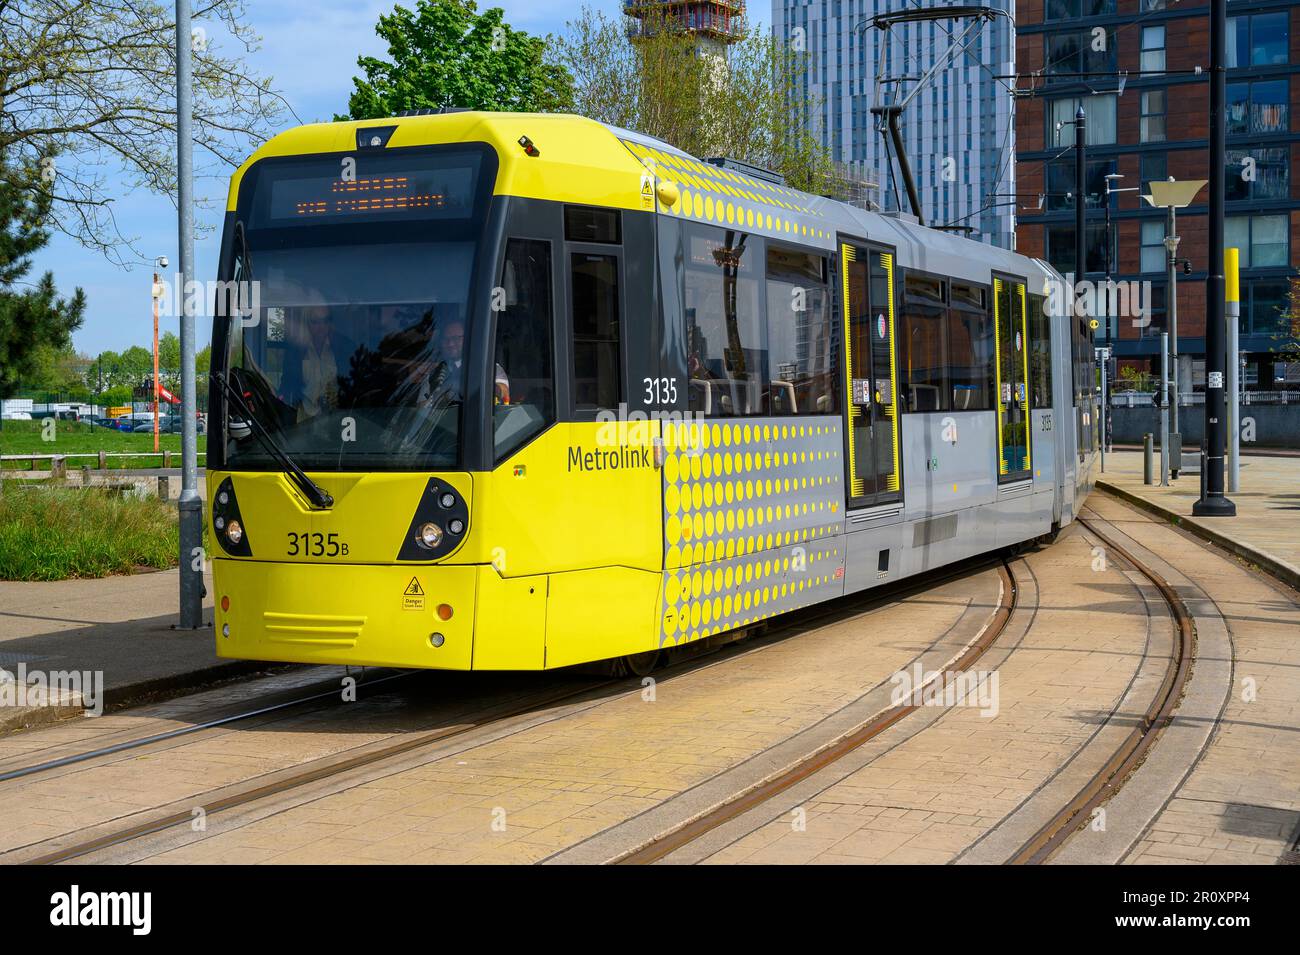 Manchester Metrolink tram travelling through Greater Manchester, England. Stock Photo